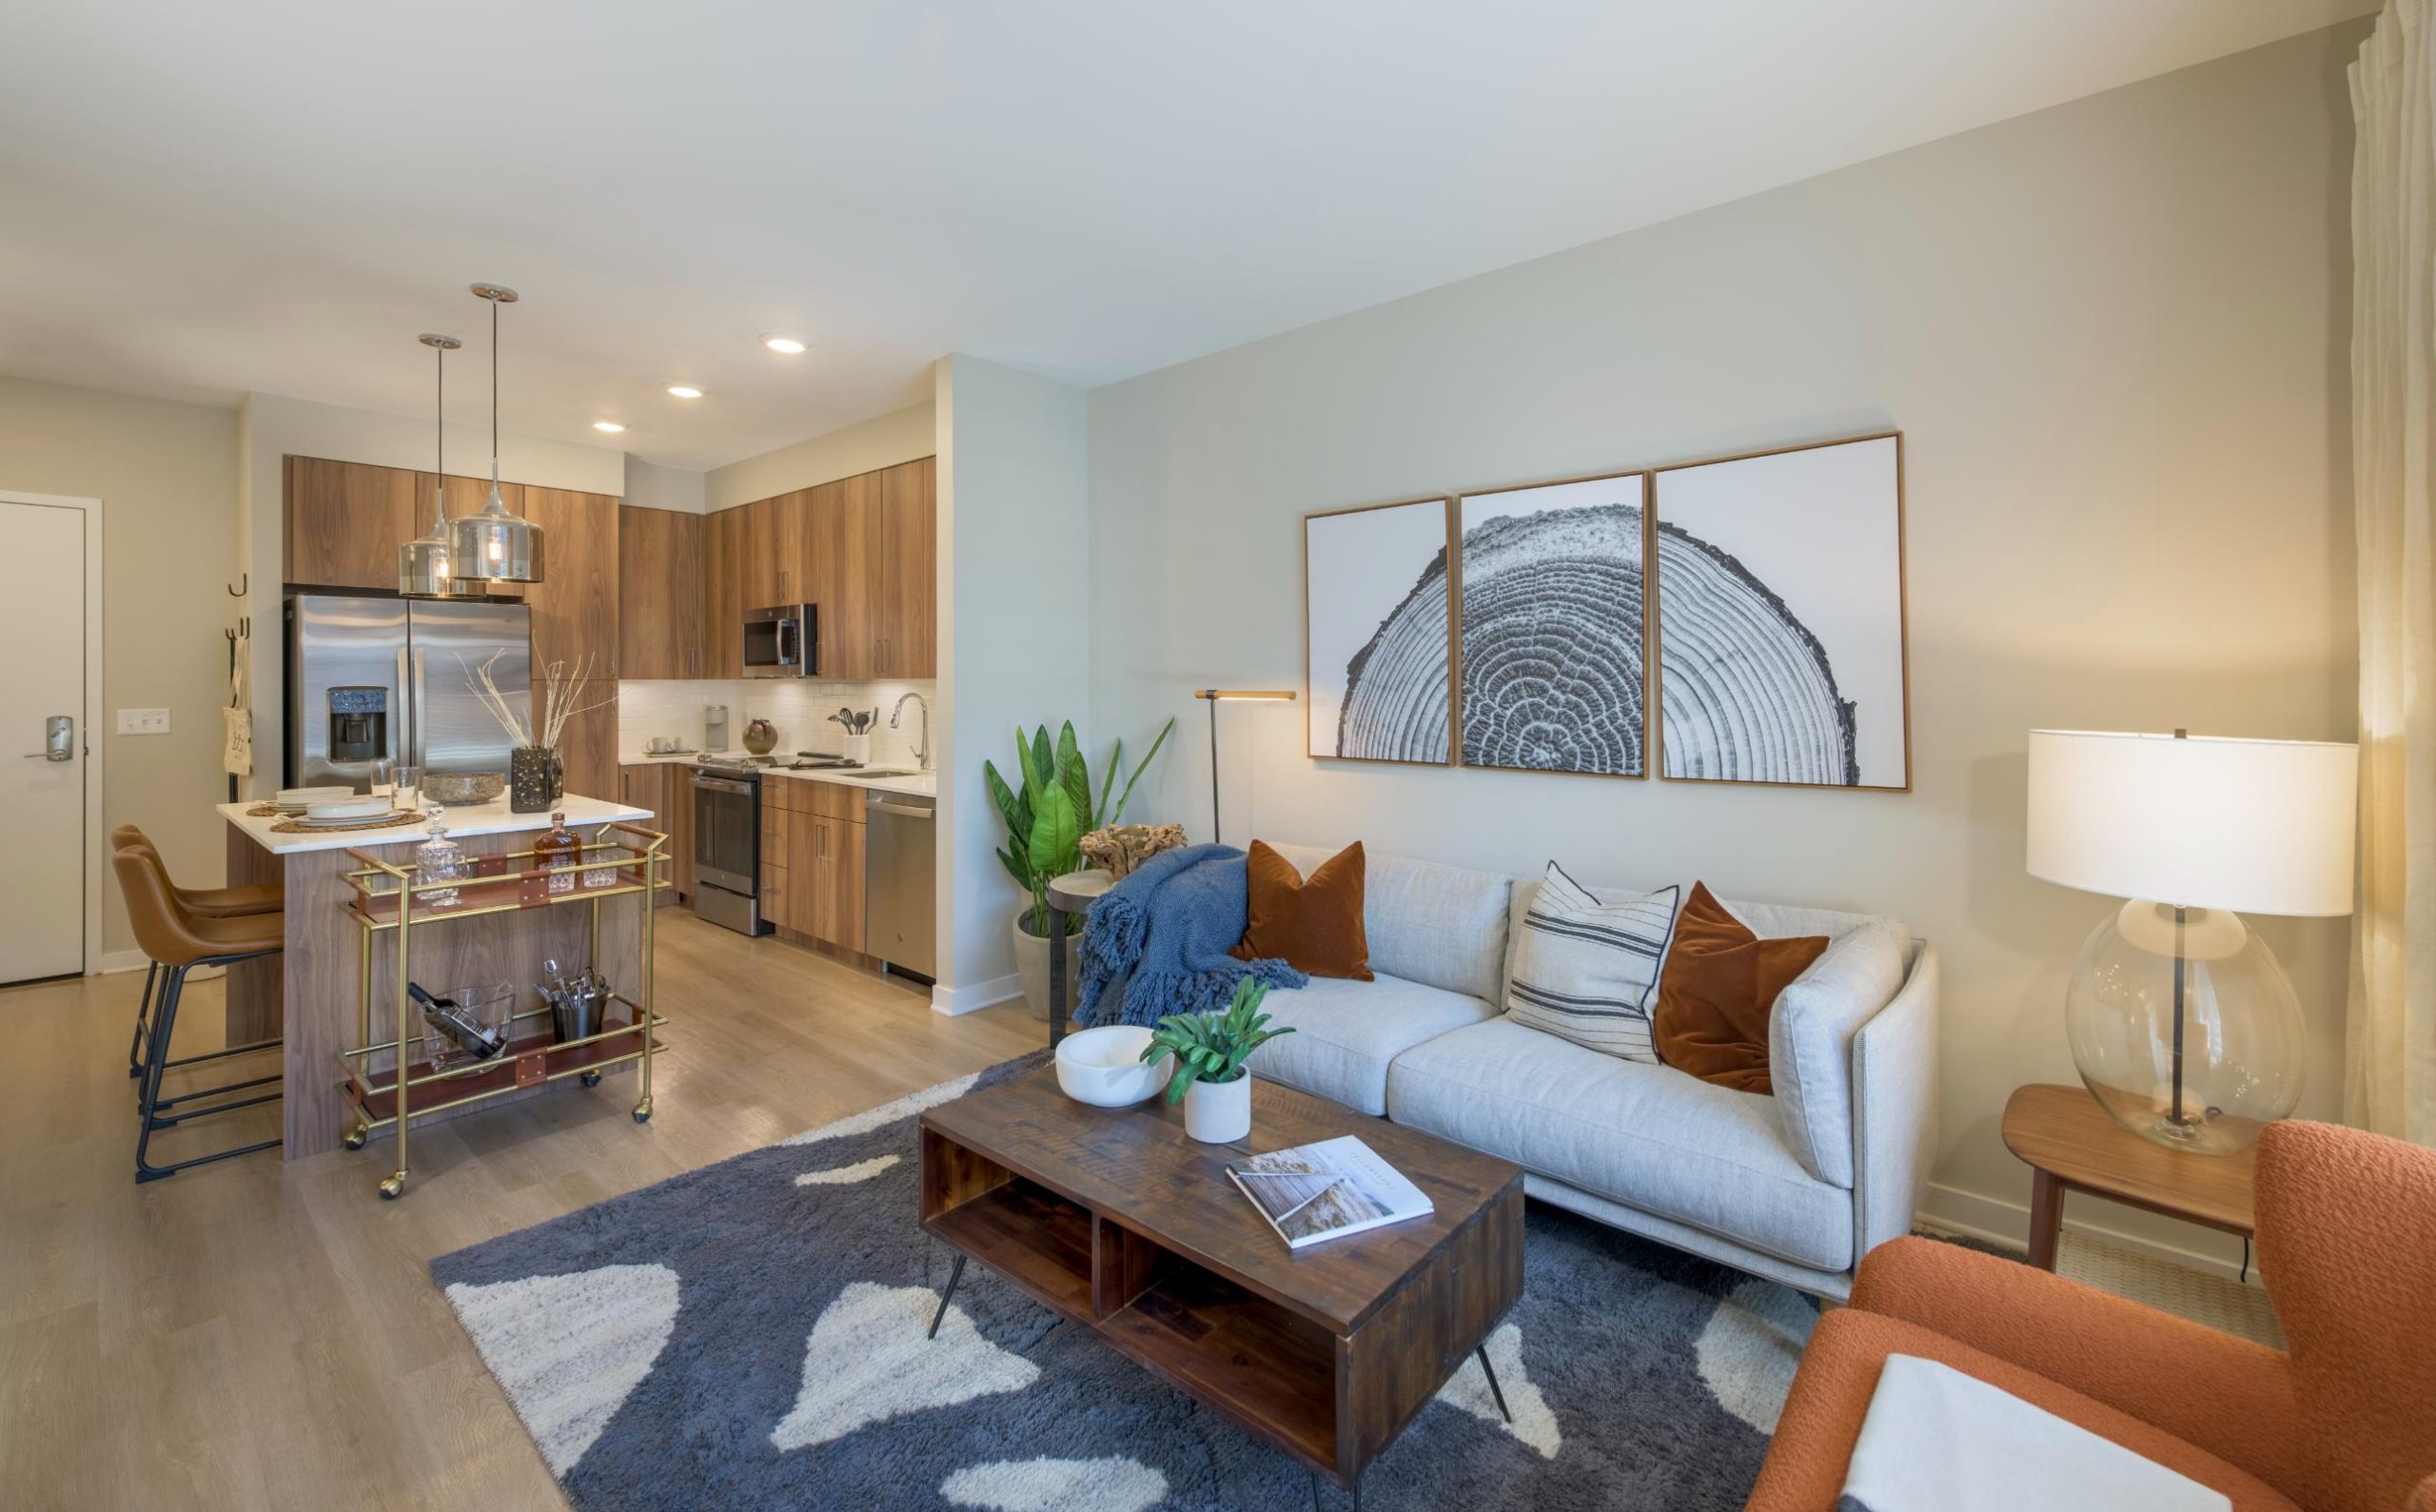 Find your perfect home among our variety of studio, 1-bedroom and 2-bedroom floor plans